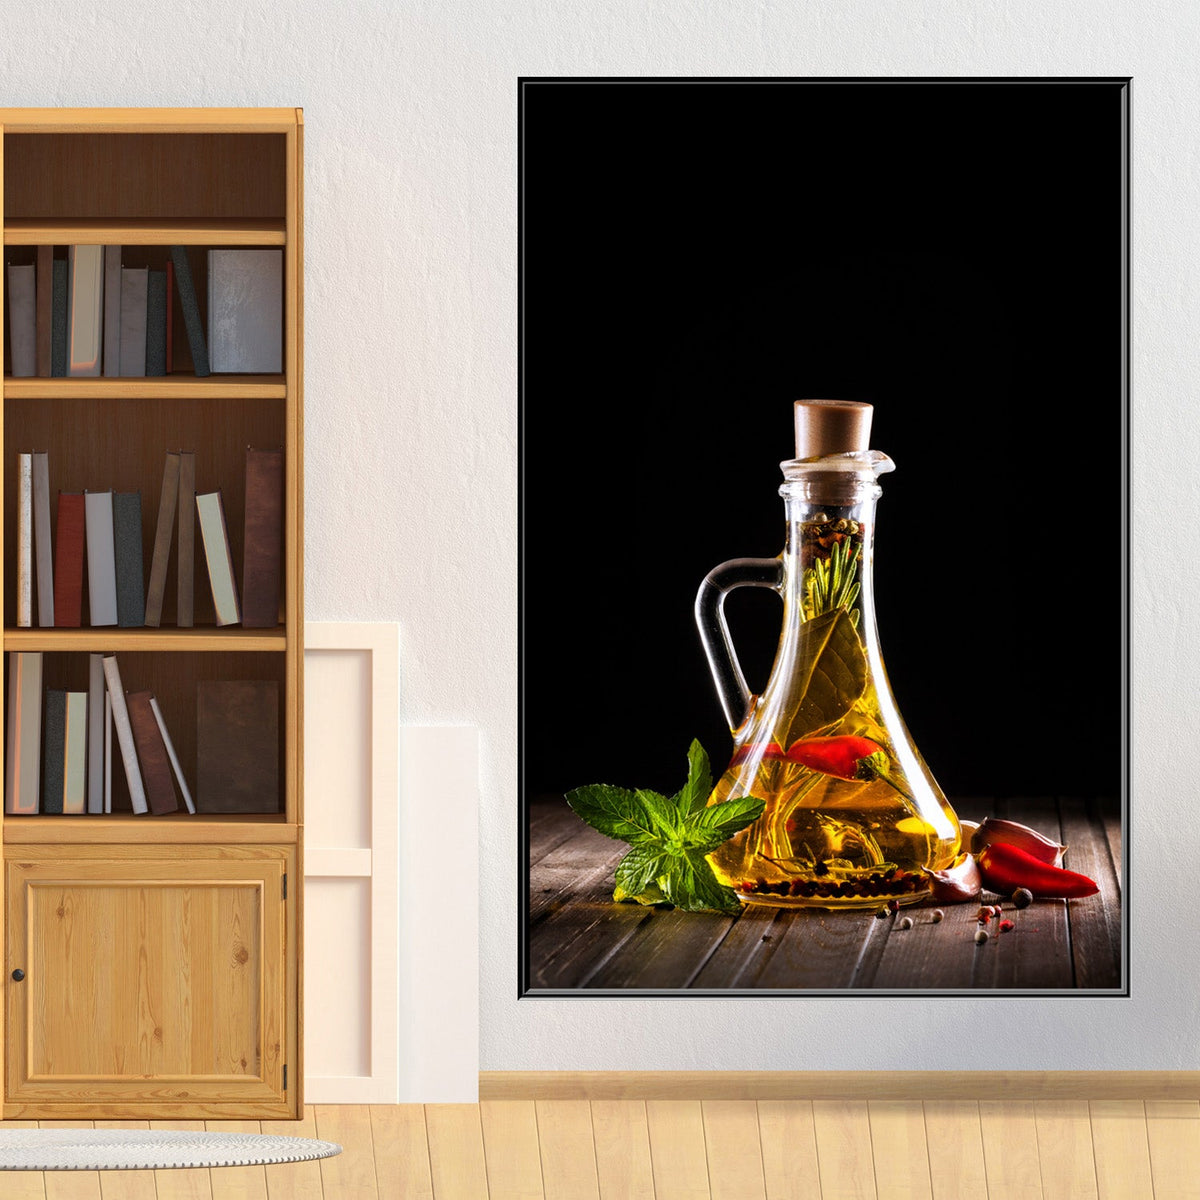 https://cdn.shopify.com/s/files/1/0387/9986/8044/products/OliveOilwithHerbsCanvasArtprintFloatingFrame-2.jpg